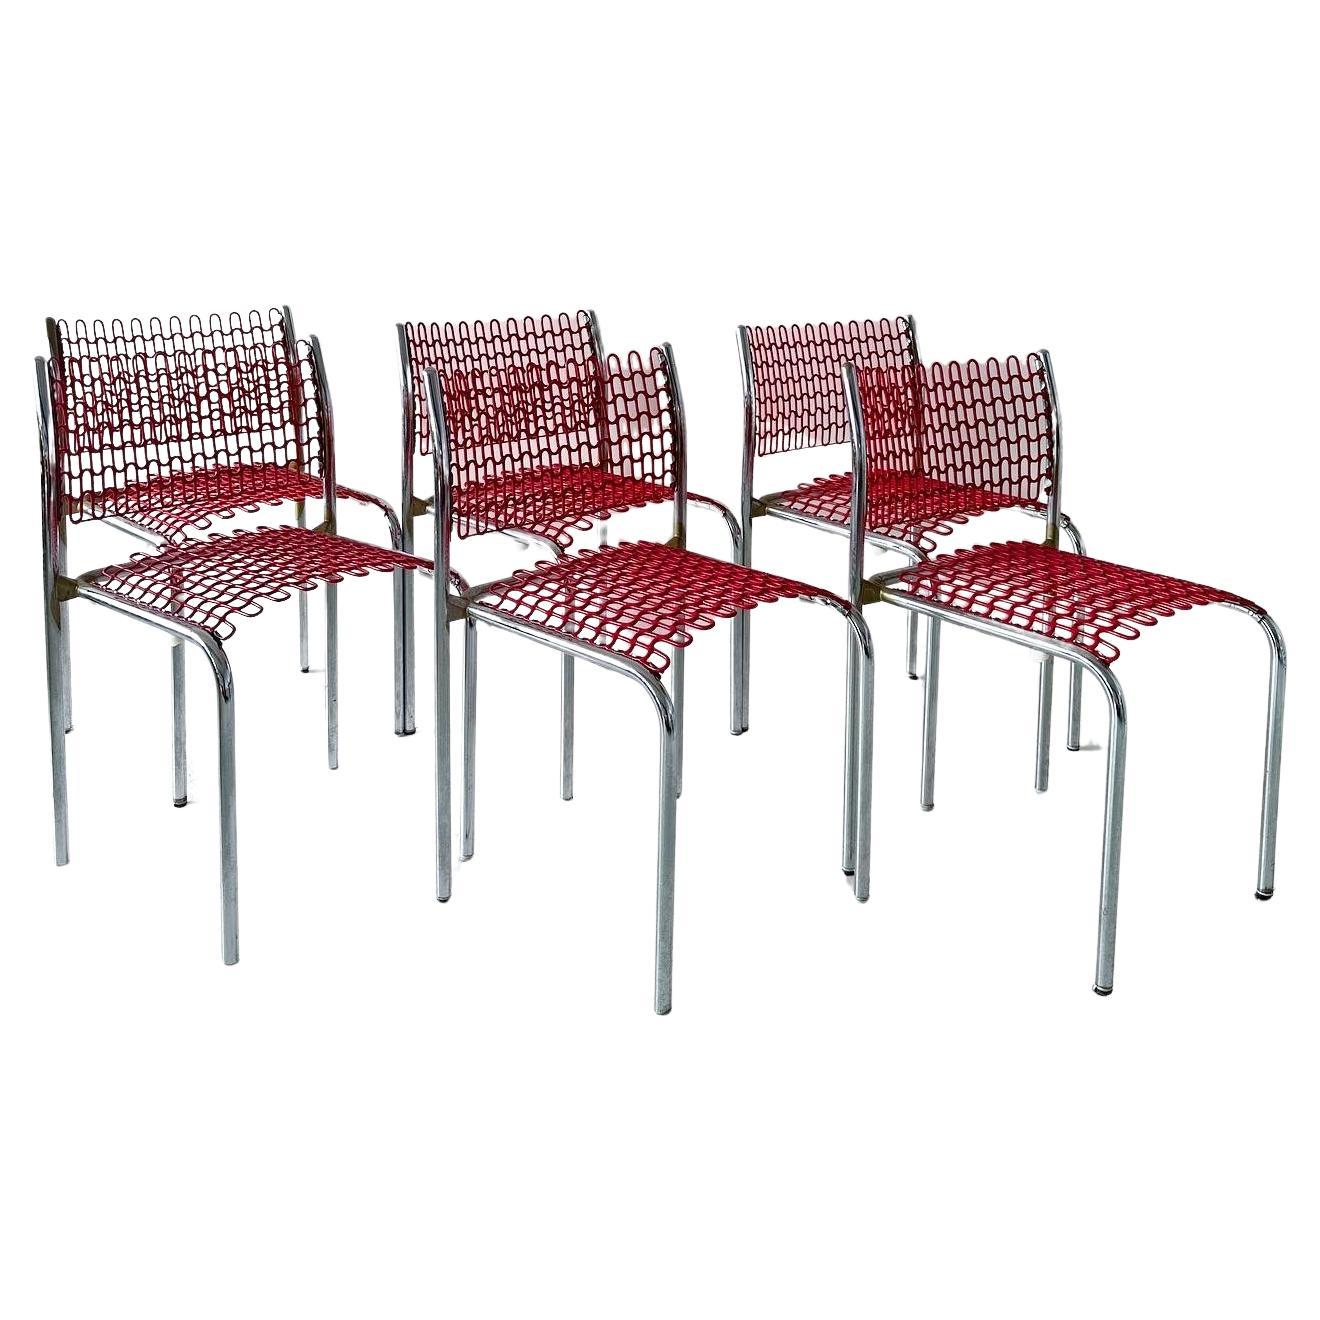 Red Sof Tech Chairs by David Rowland for Thonet (set of 4) (8 available) For Sale